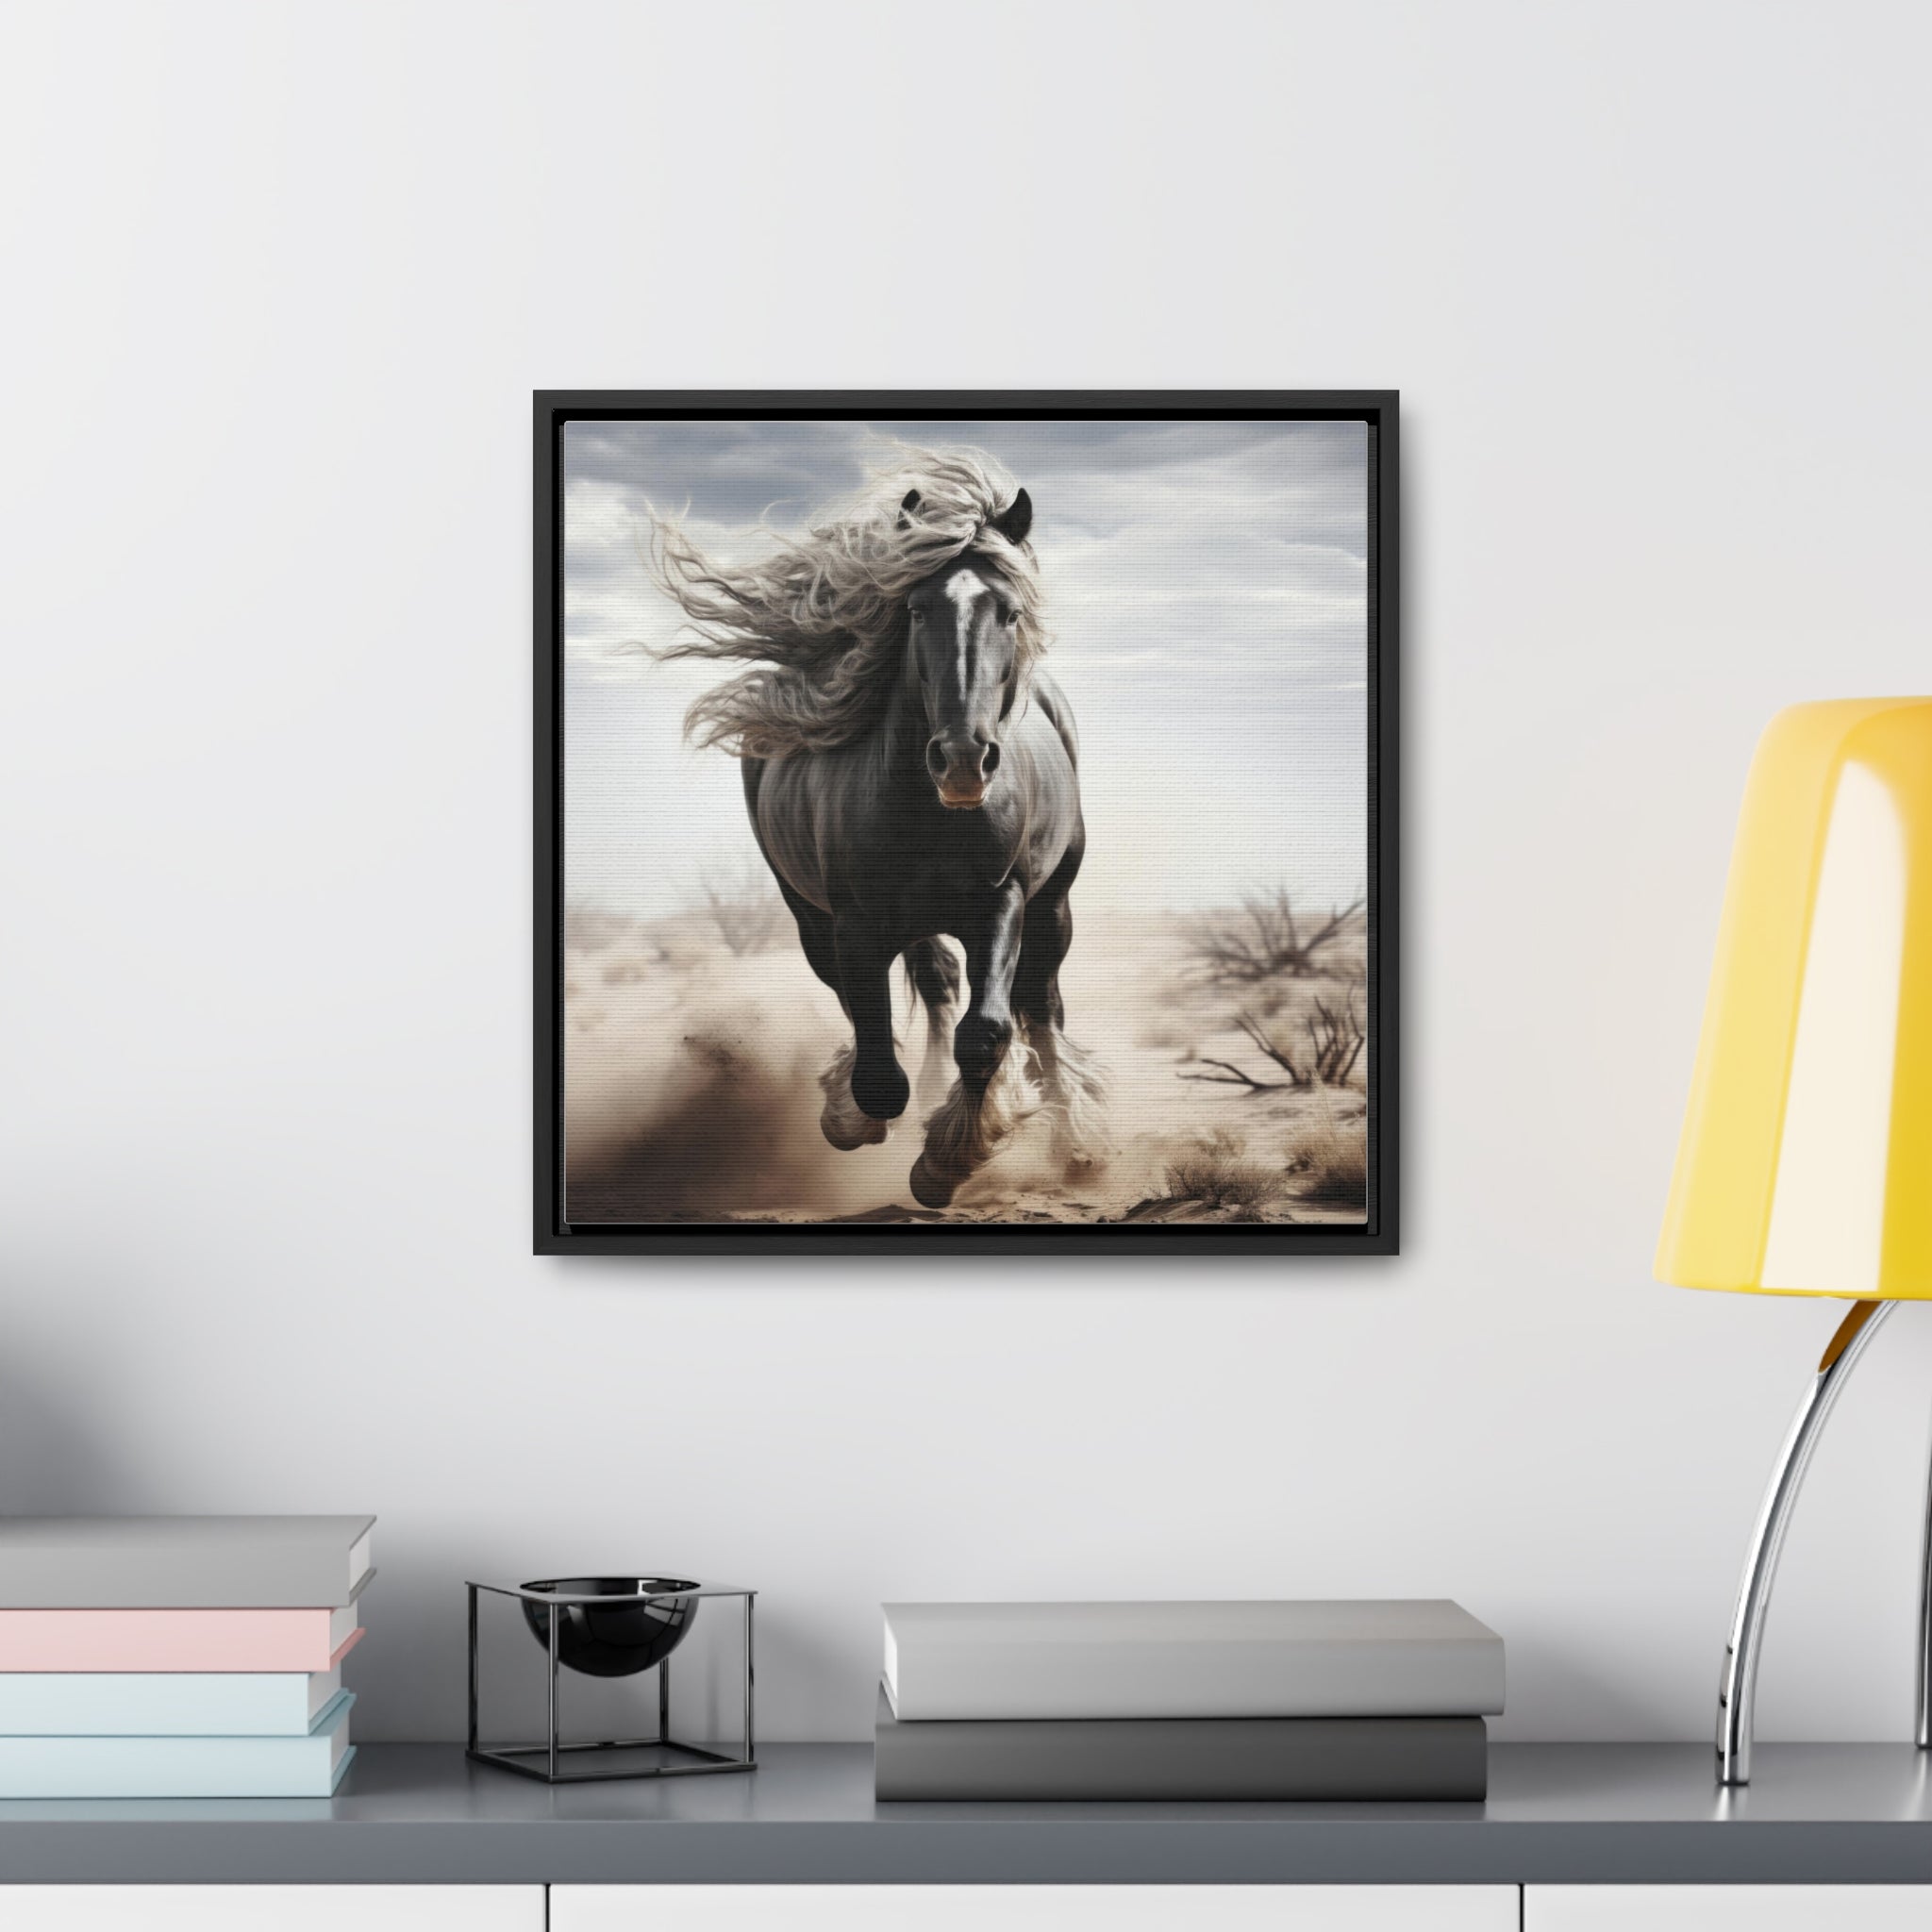 Galineers Cob | Gallery Canvas Wraps, Square Frame